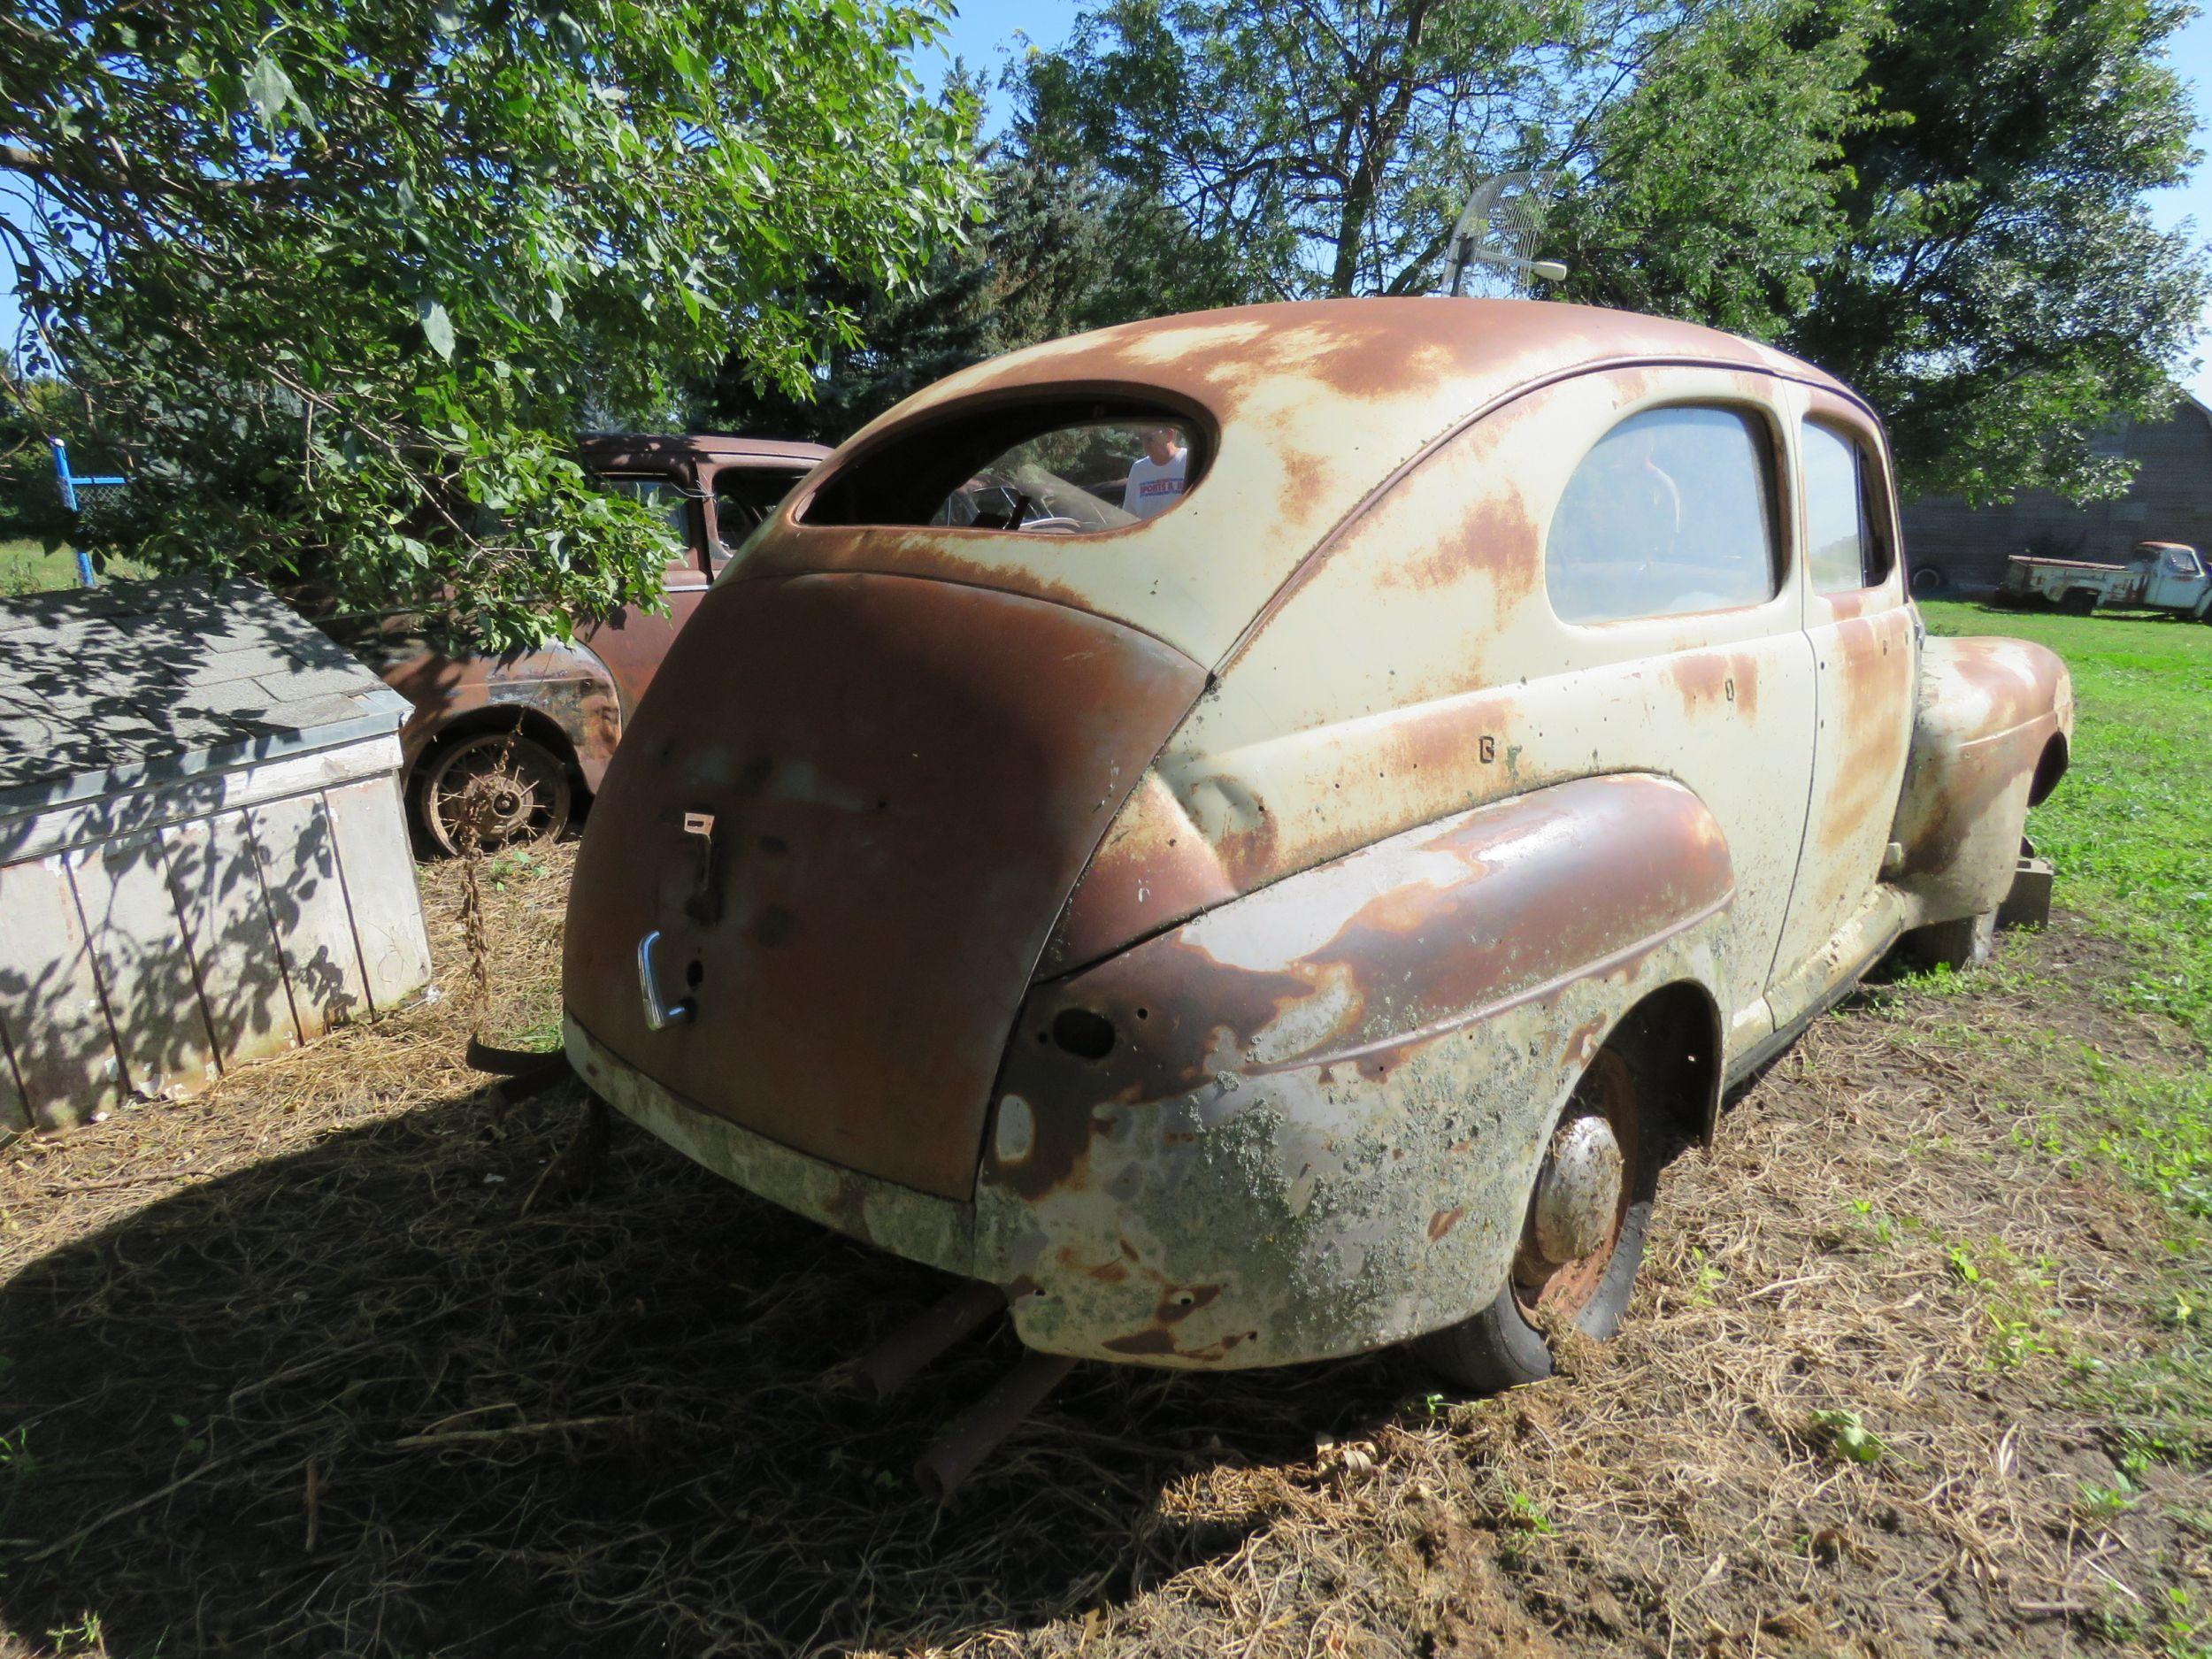 1947 Ford Deluxe 2dr Sedan for Project or Parts